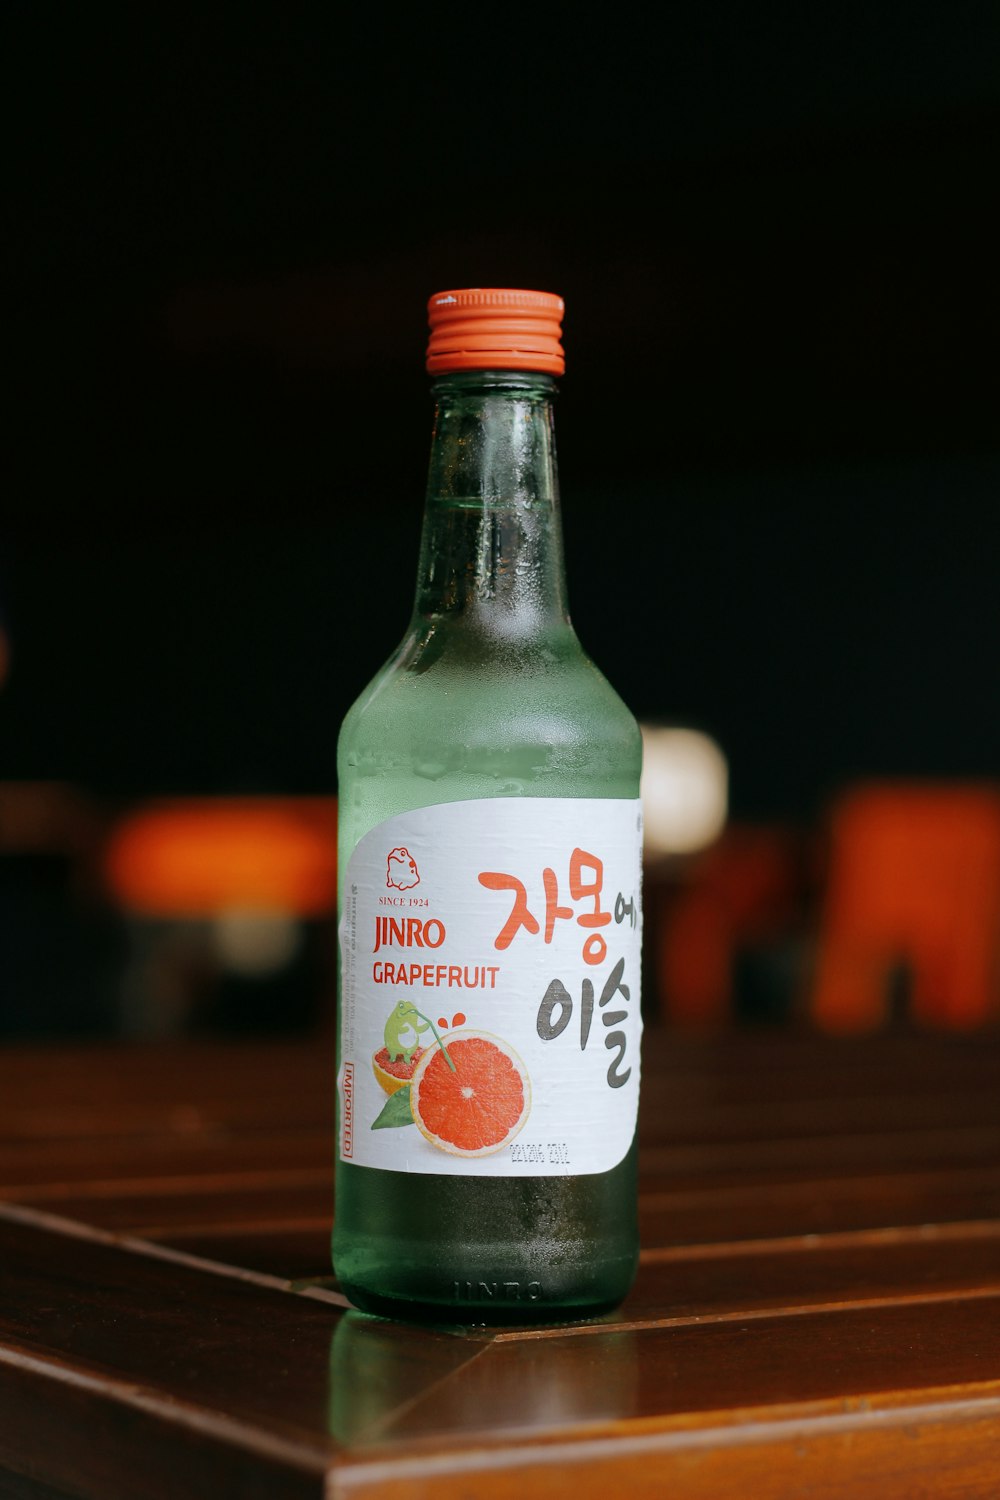 a bottle of green liquid sitting on top of a wooden table